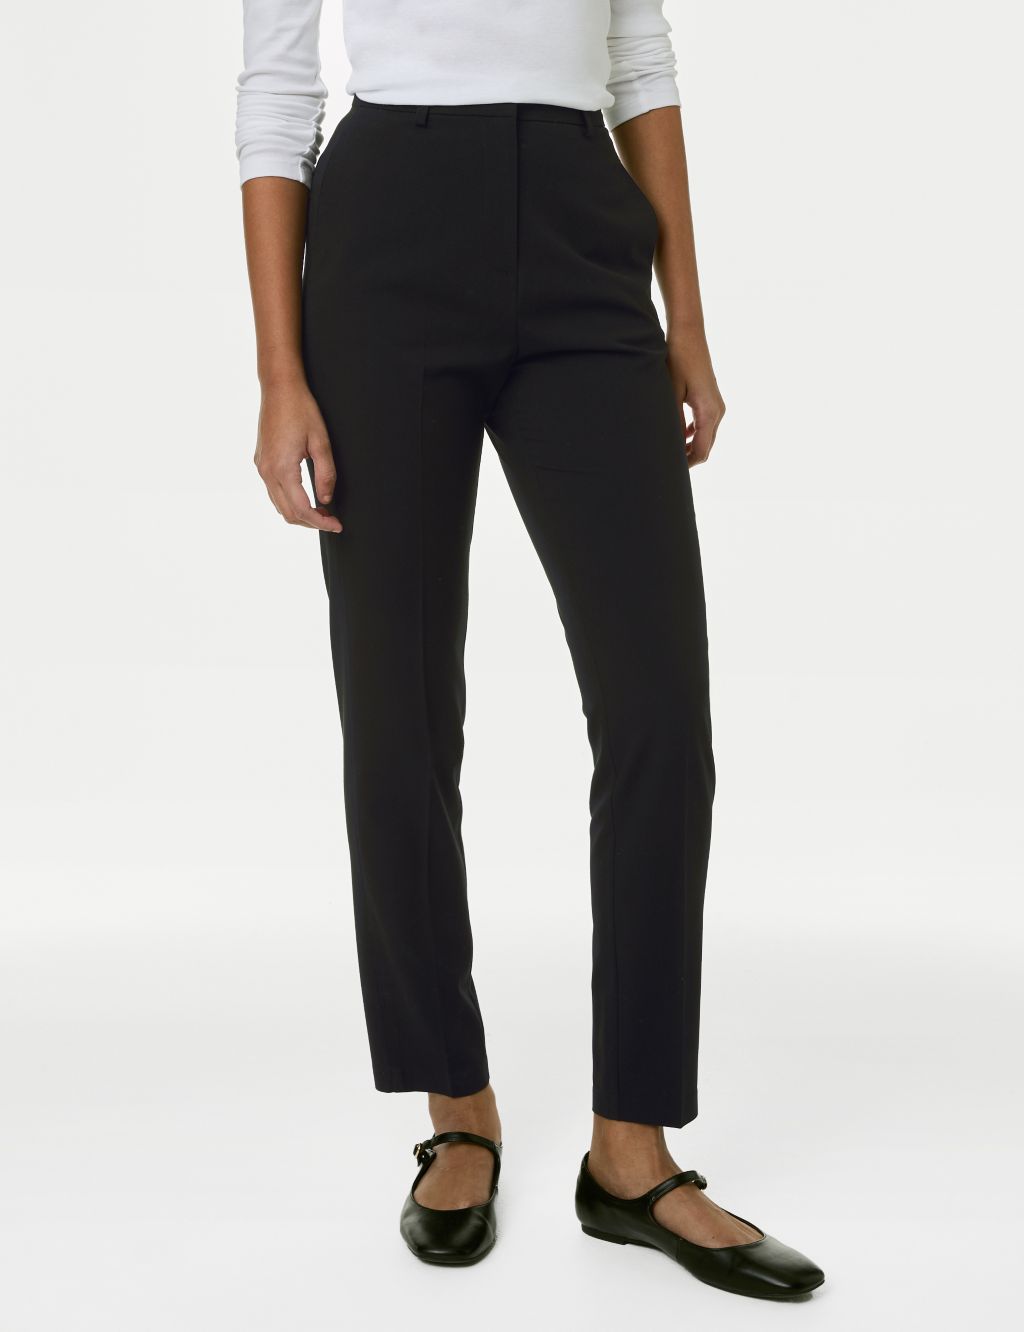 Slim Fit Ankle Grazer Trousers with Stretch image 2